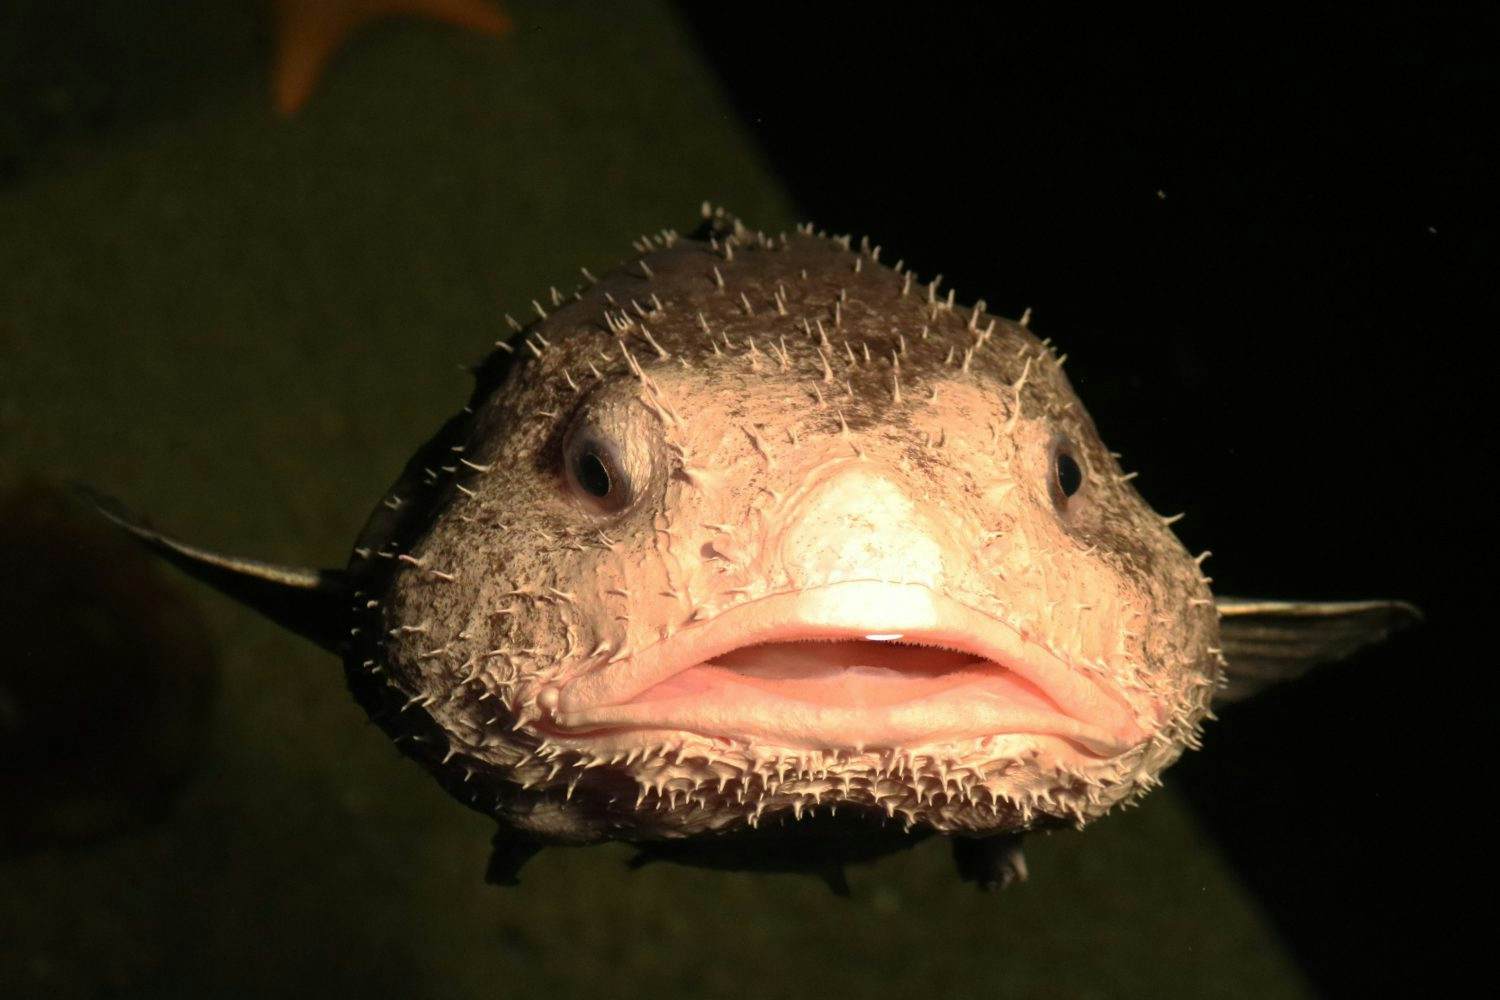 Enter the Ugliest Fish in the Sea the Blobfish